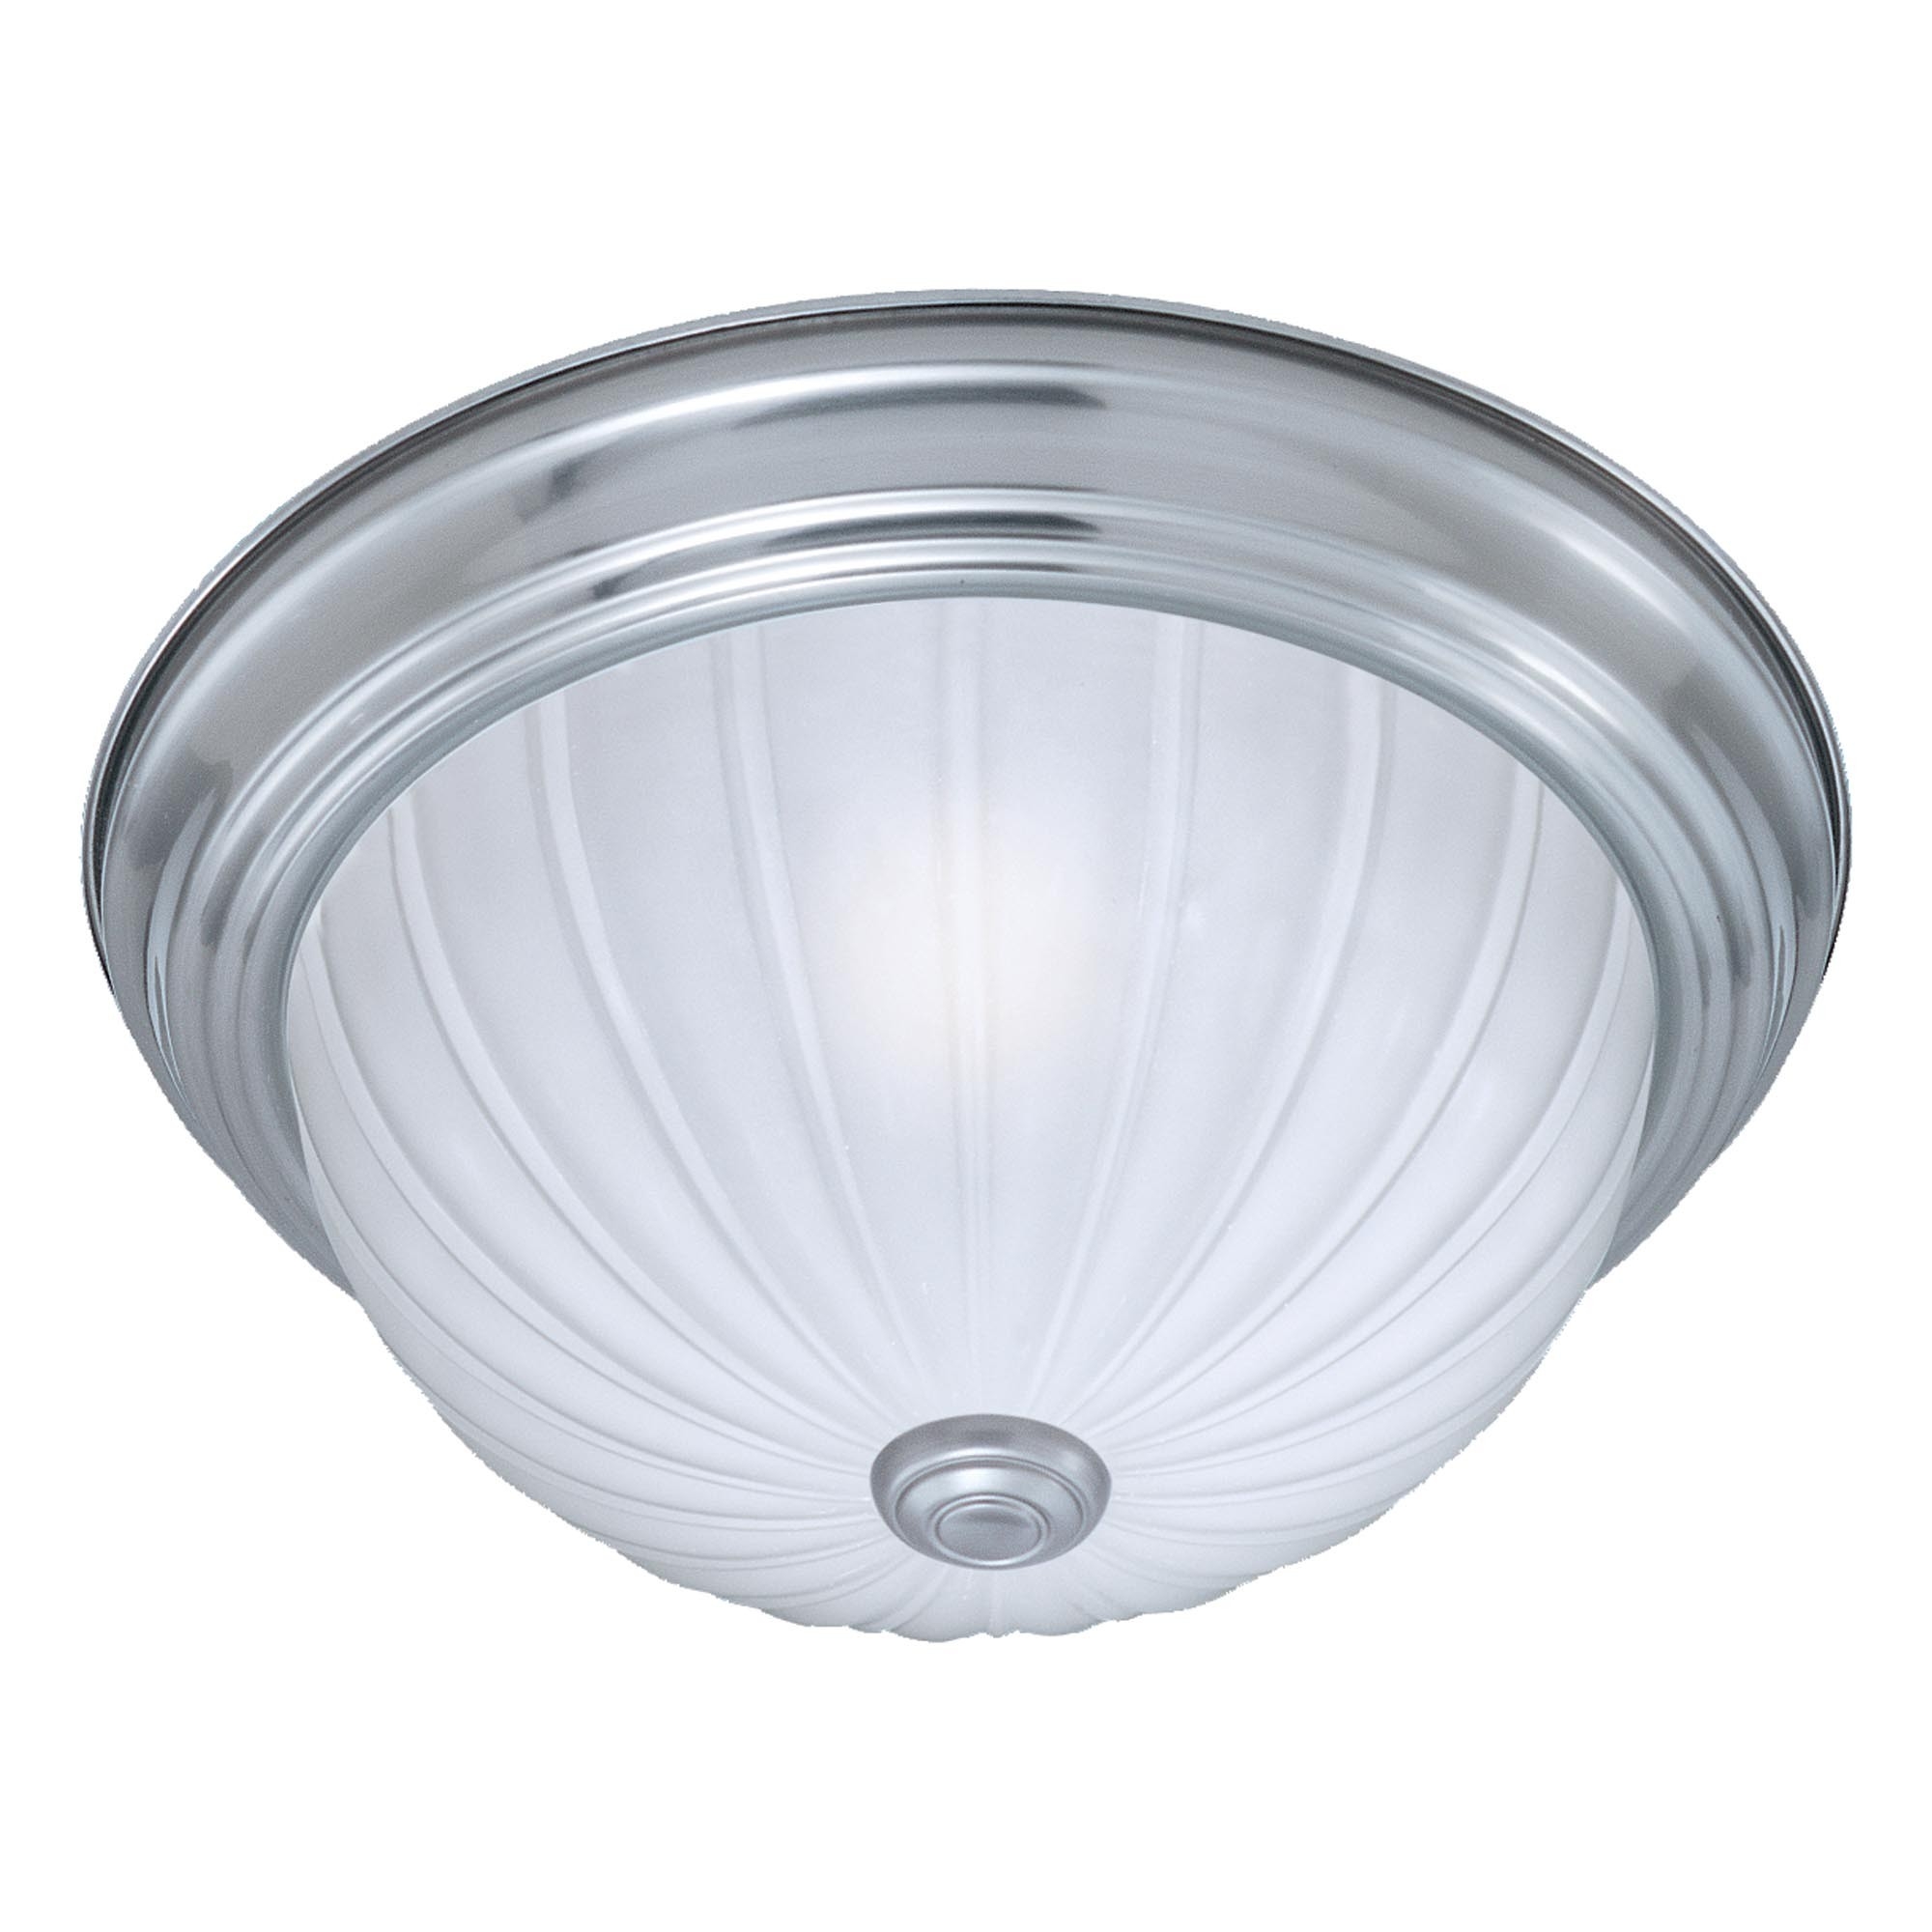 Types Of Ceiling Light Fixture